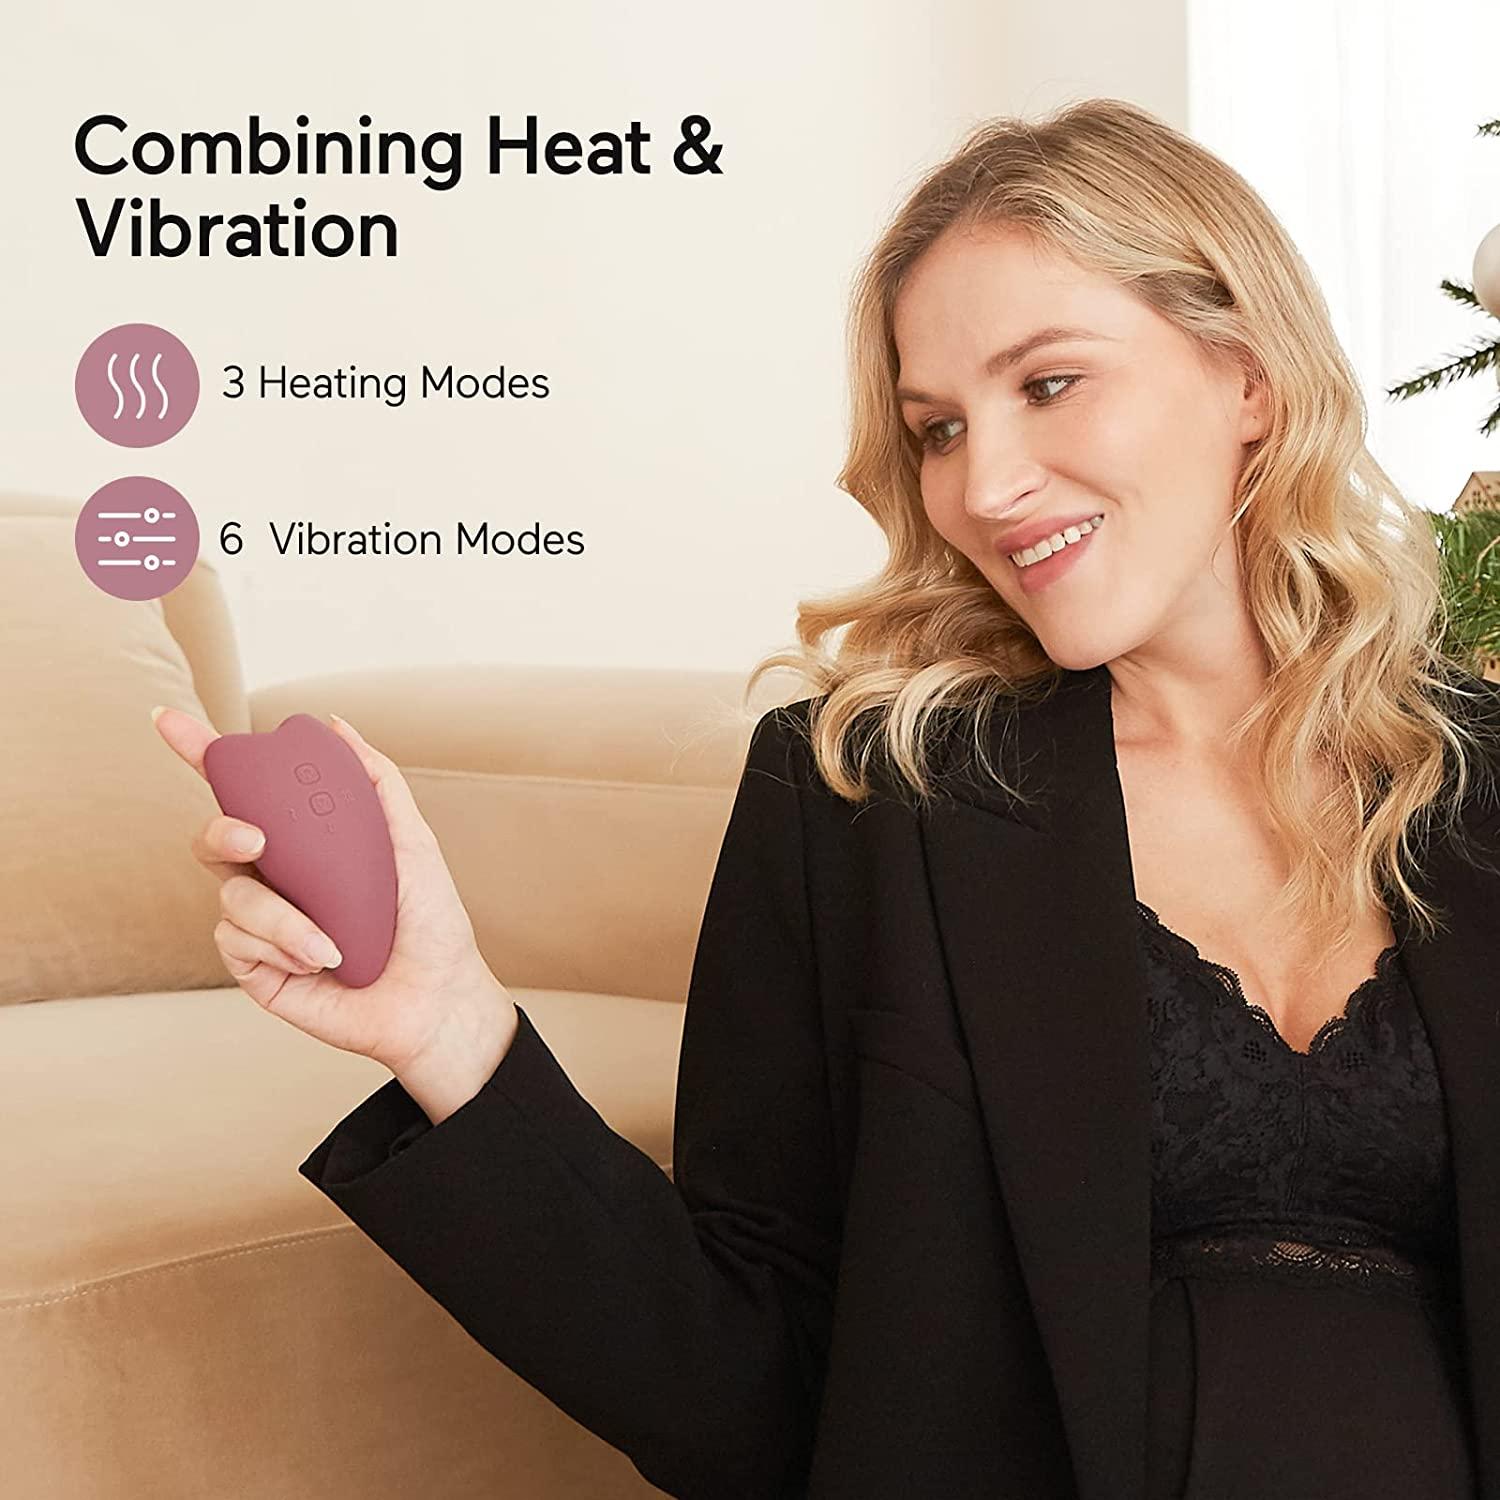 Warming Lactation Massager Soft Silicone Breast Massager for